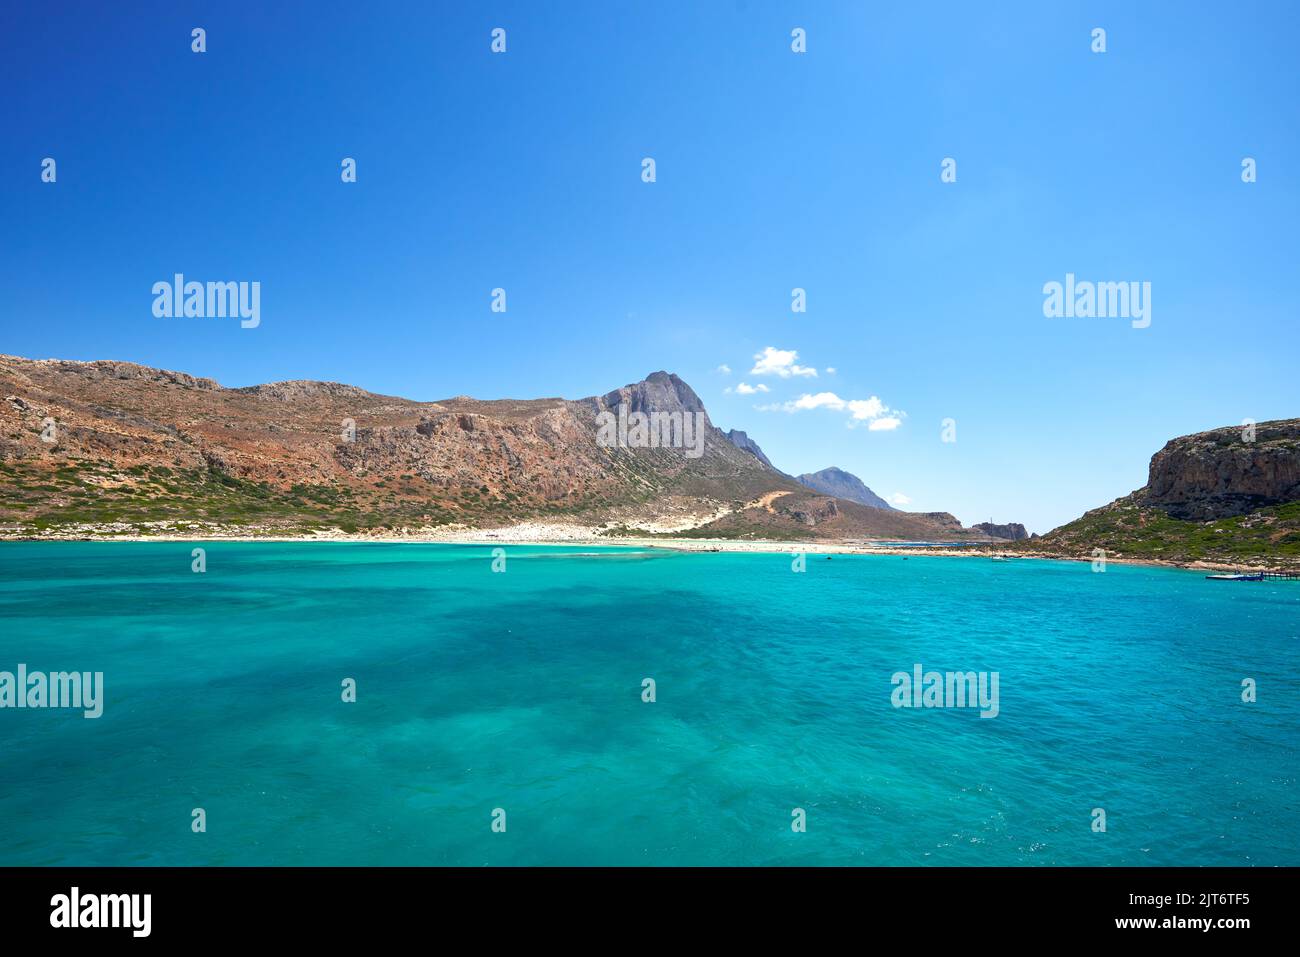 Amazing scenery of Greek islands - Balos bay with finest beaches and turquoise sea Stock Photo